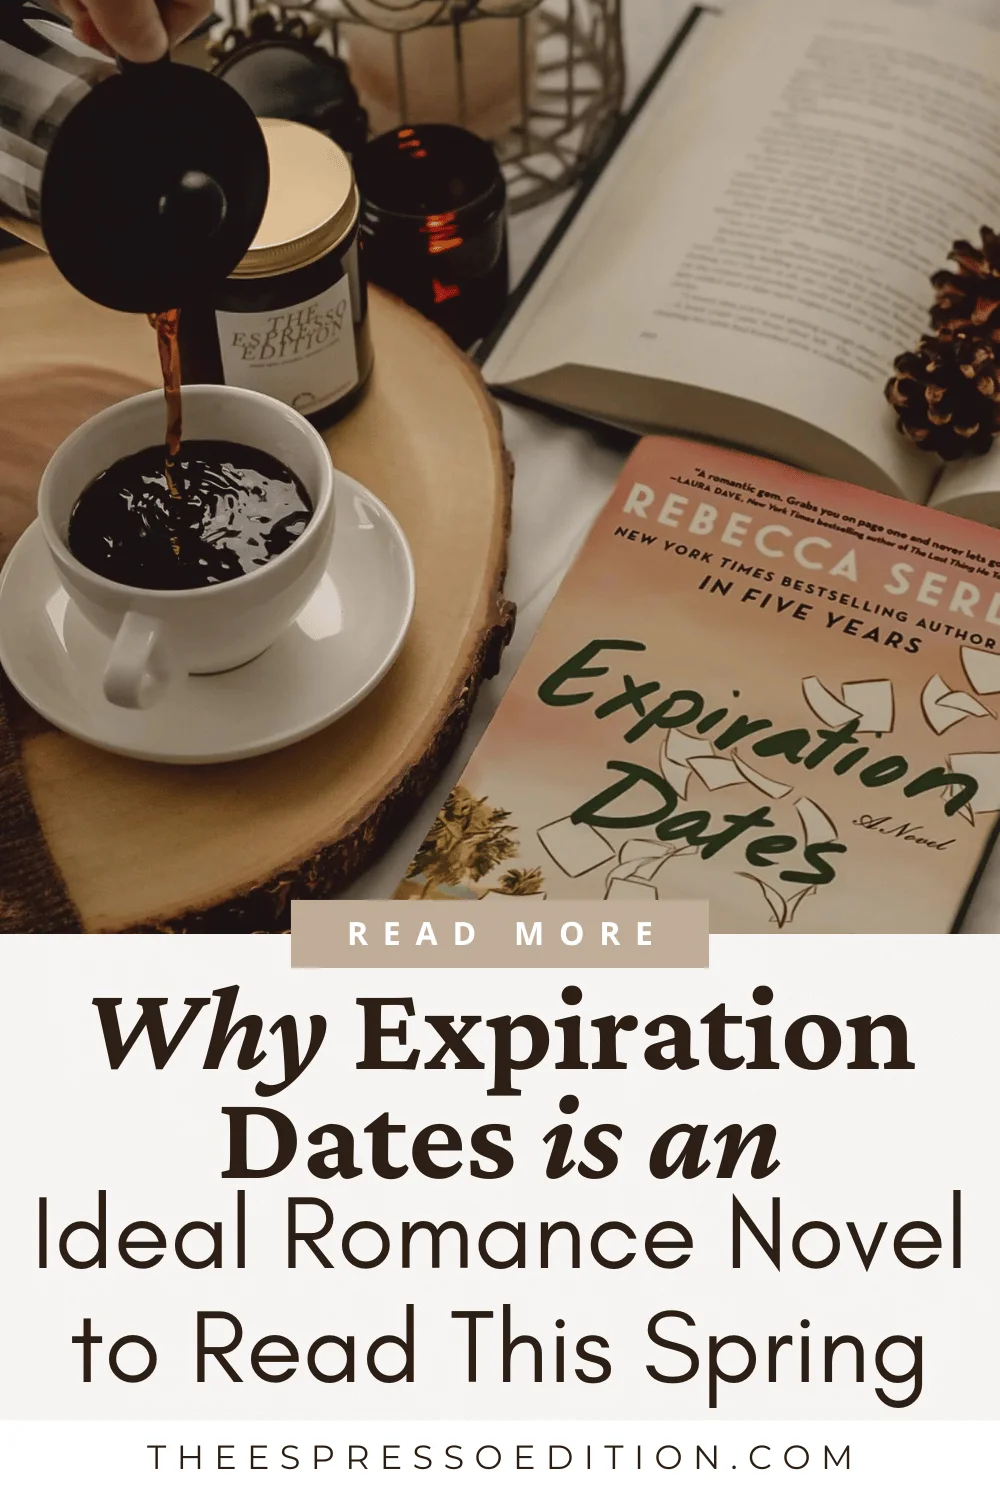 Why “Expiration Dates” is an Ideal Romance Novel to Read This Spring by The Espresso Edition cozy bookish blog